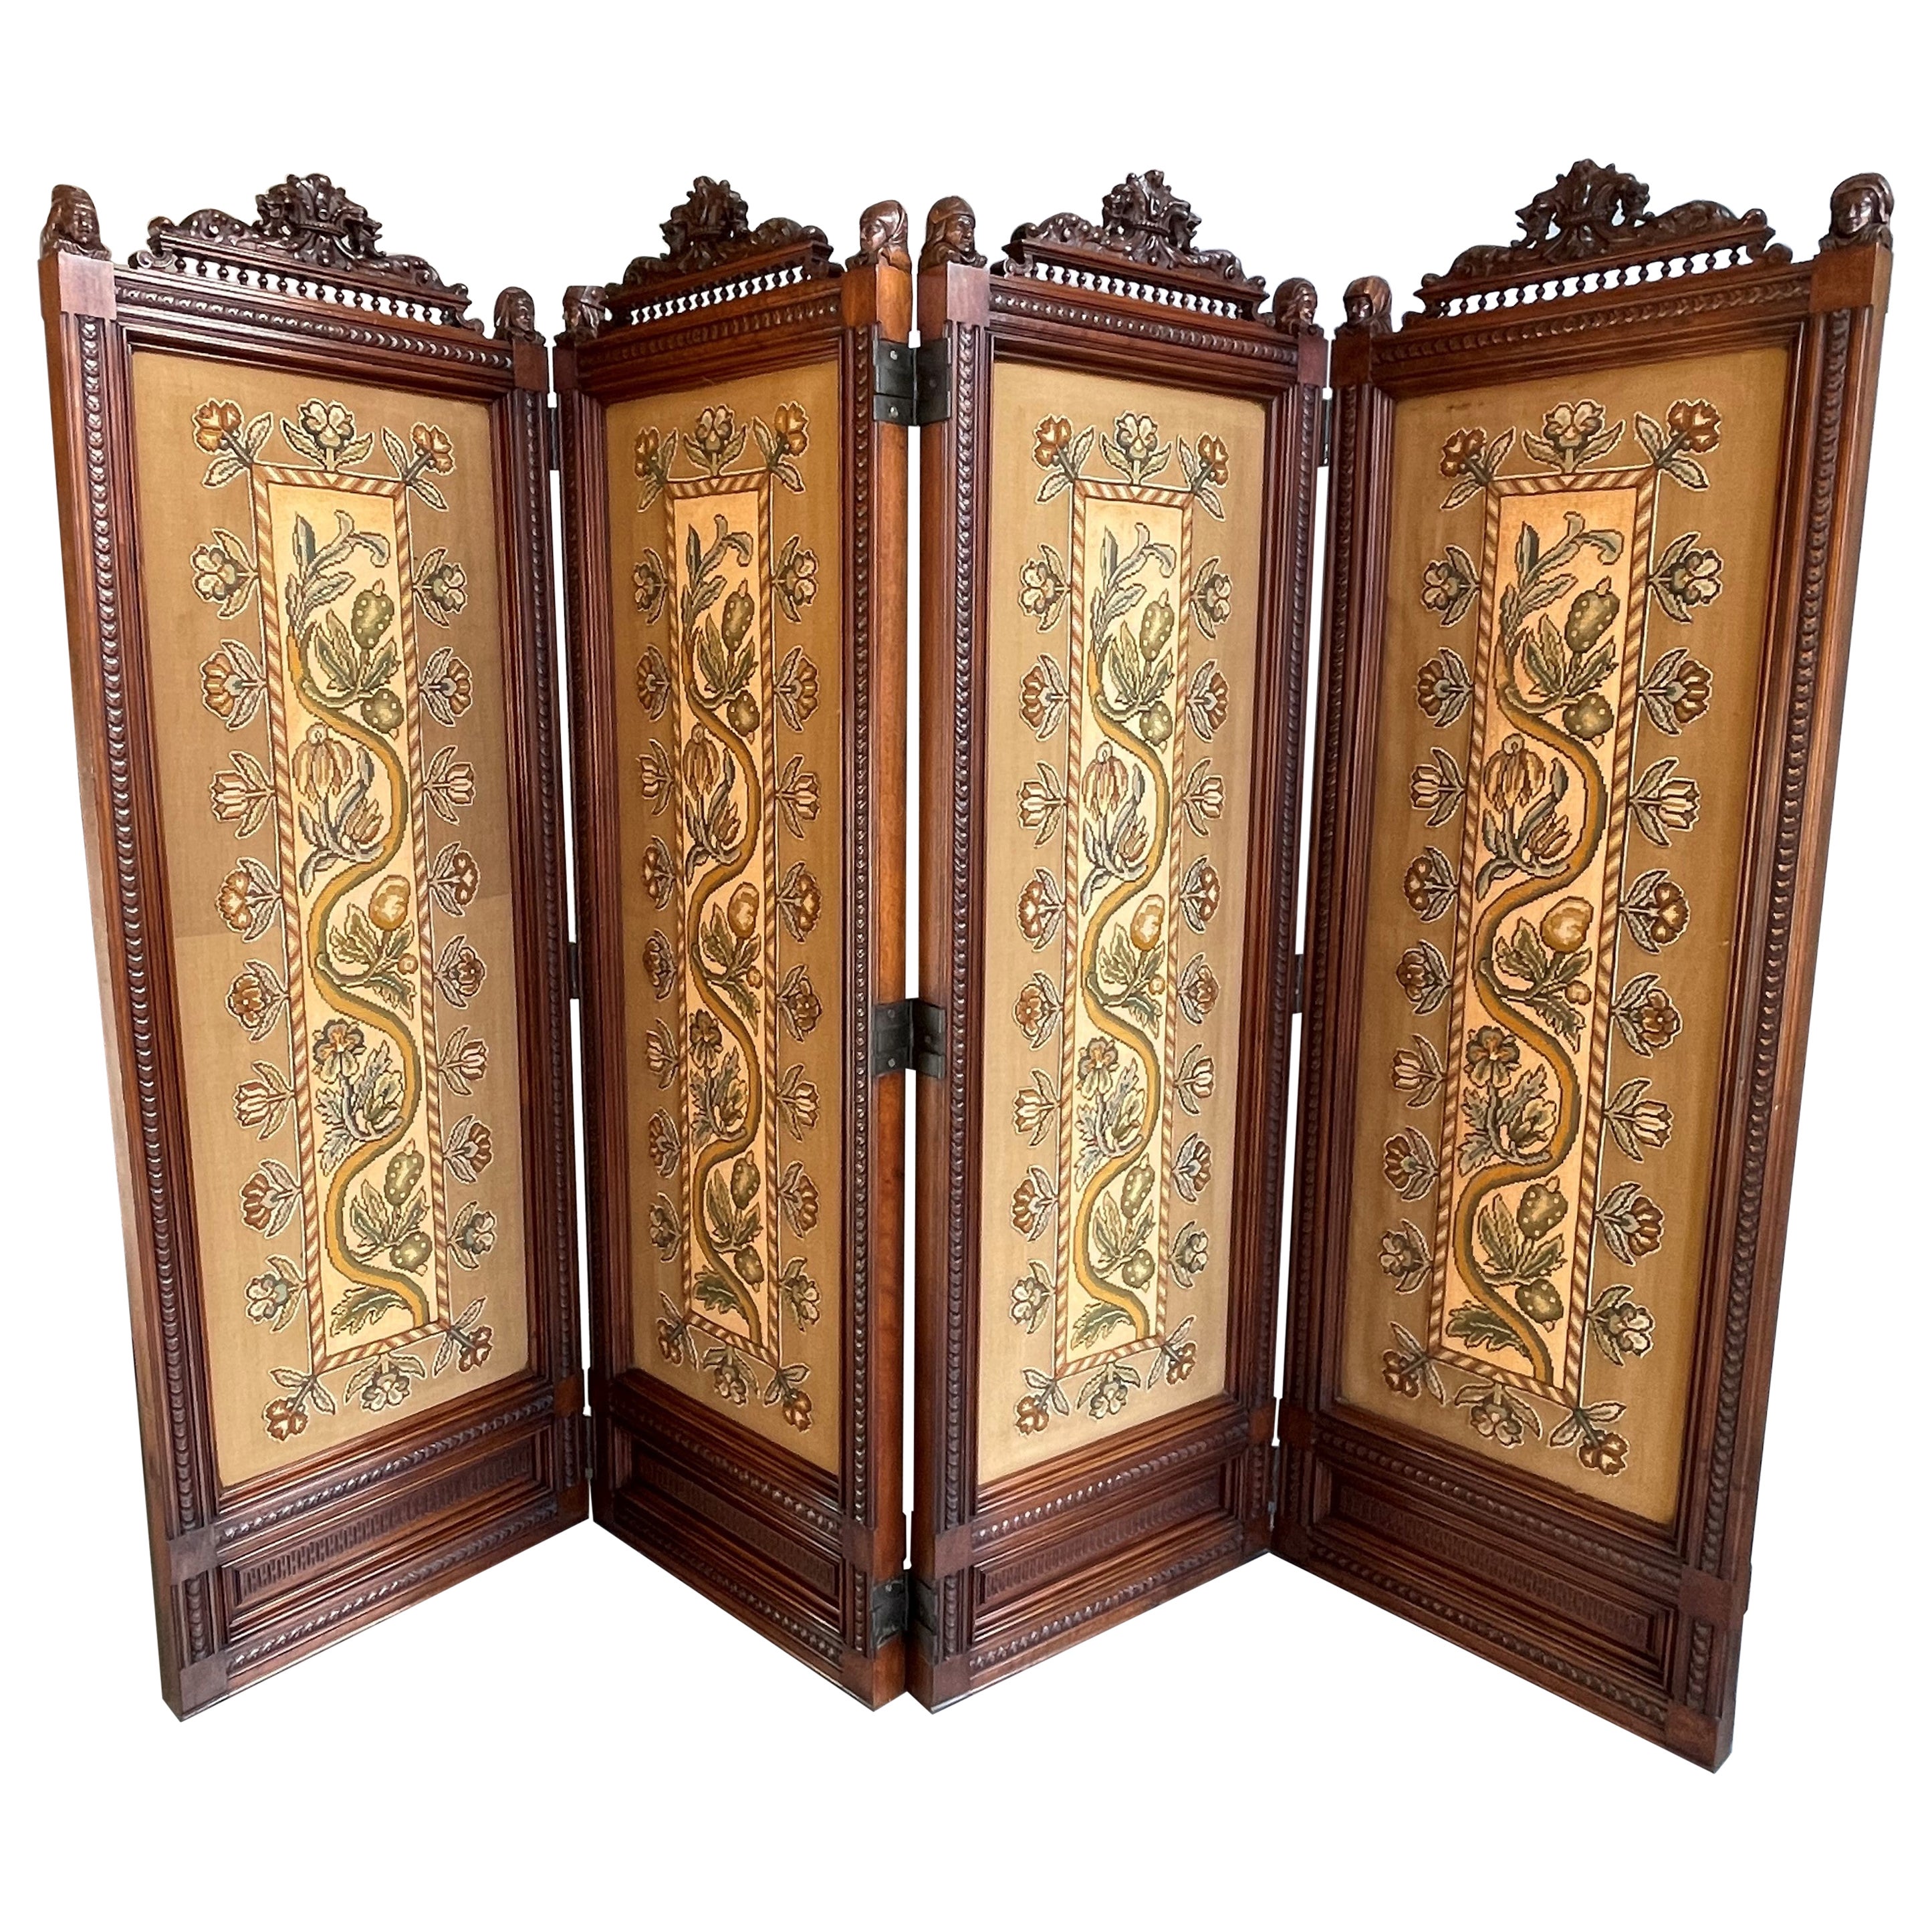 Stunning Renaissance Revival Folding Screen w. Embroidery and 8 Bust Sculptures